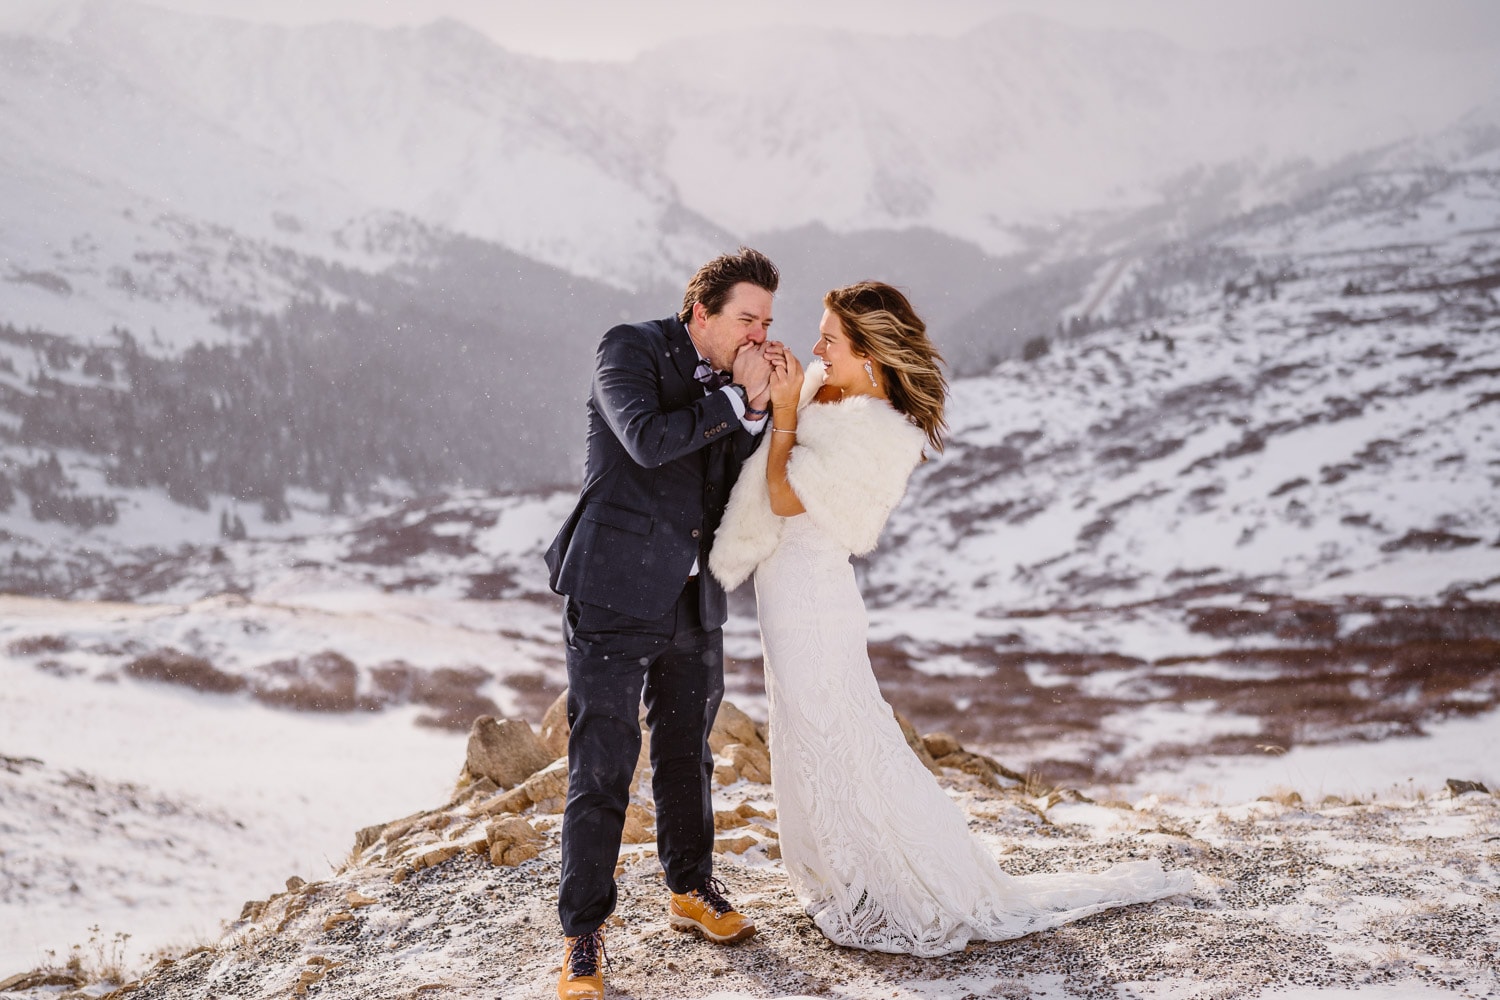 Couple sharing a laugh during a blizzard on top of a mountain in Colorado during the winter.